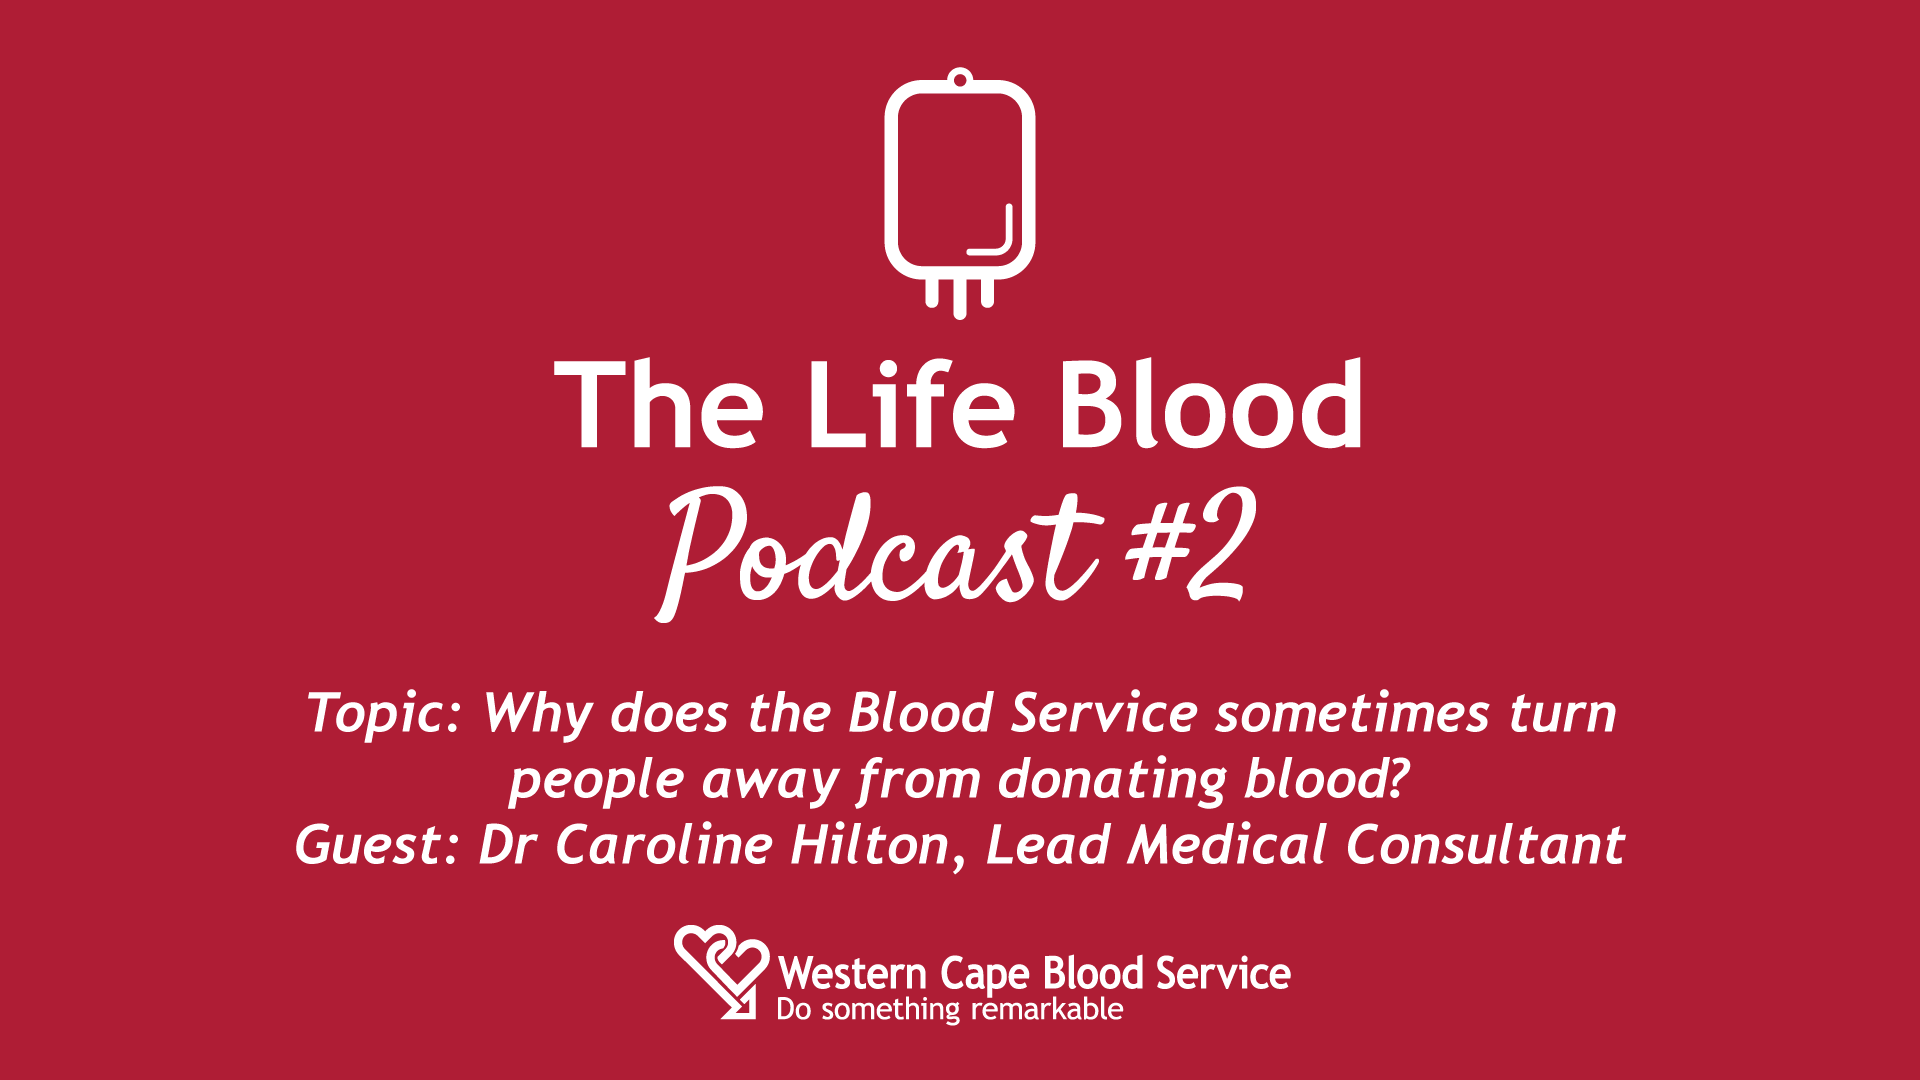 The Life Blood Podcast